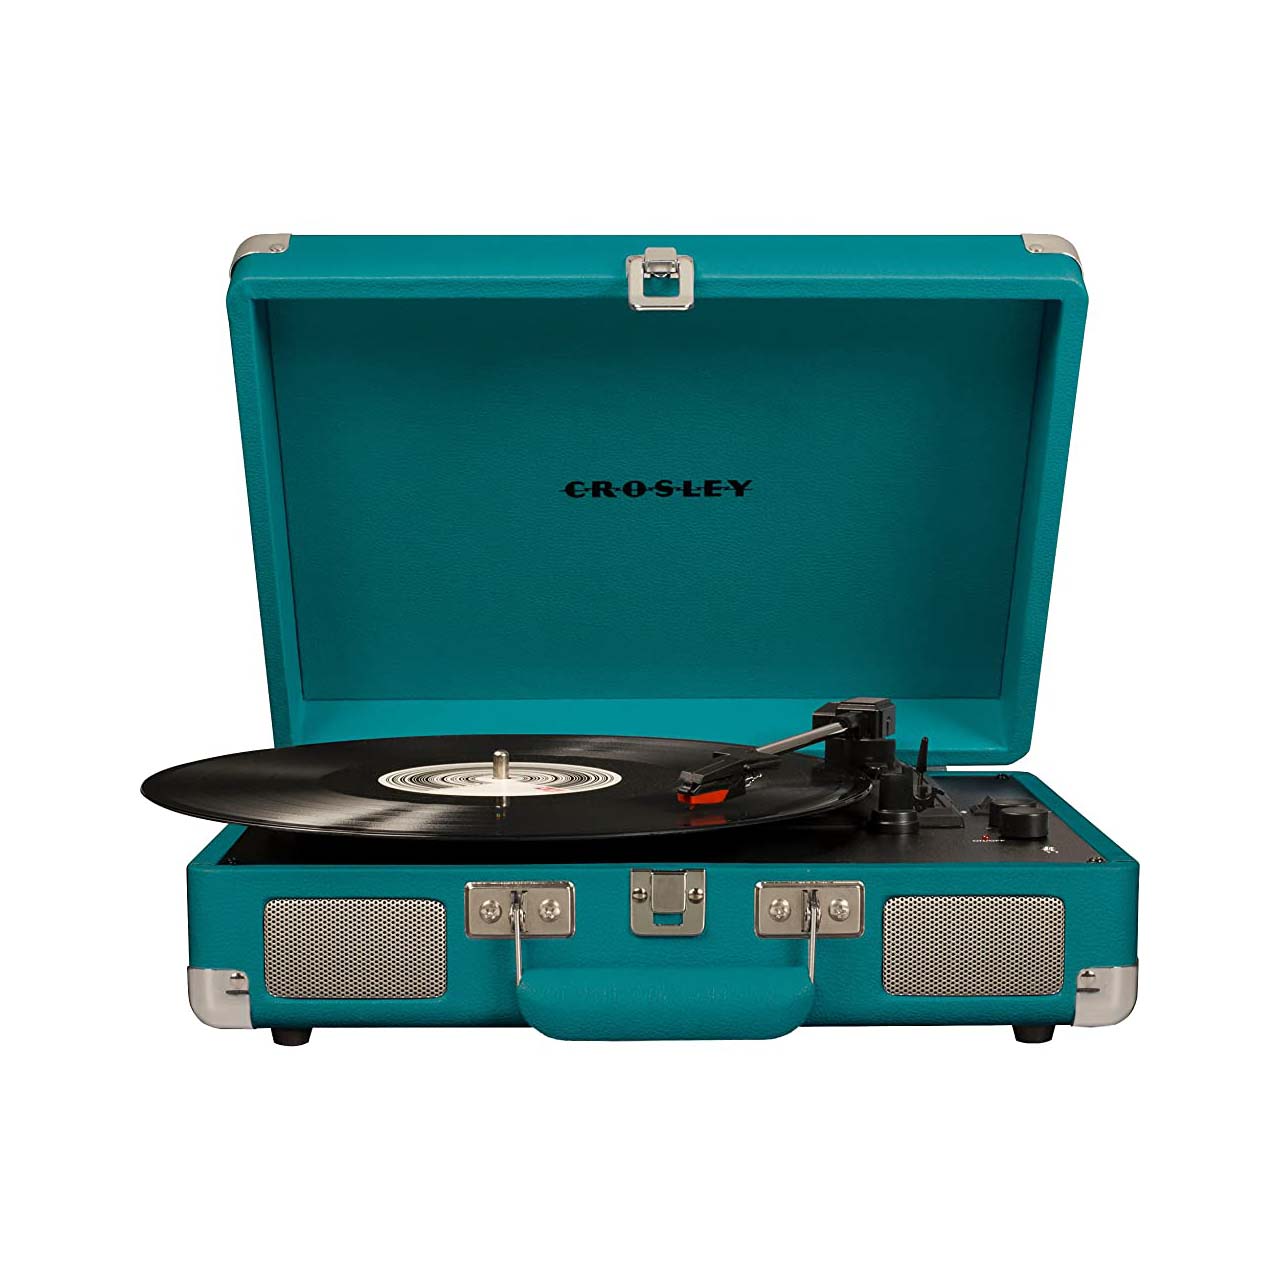 Crosley Cruiser Deluxe Vintage 3-Speed Portable Turntable + Free Record Storage Crate